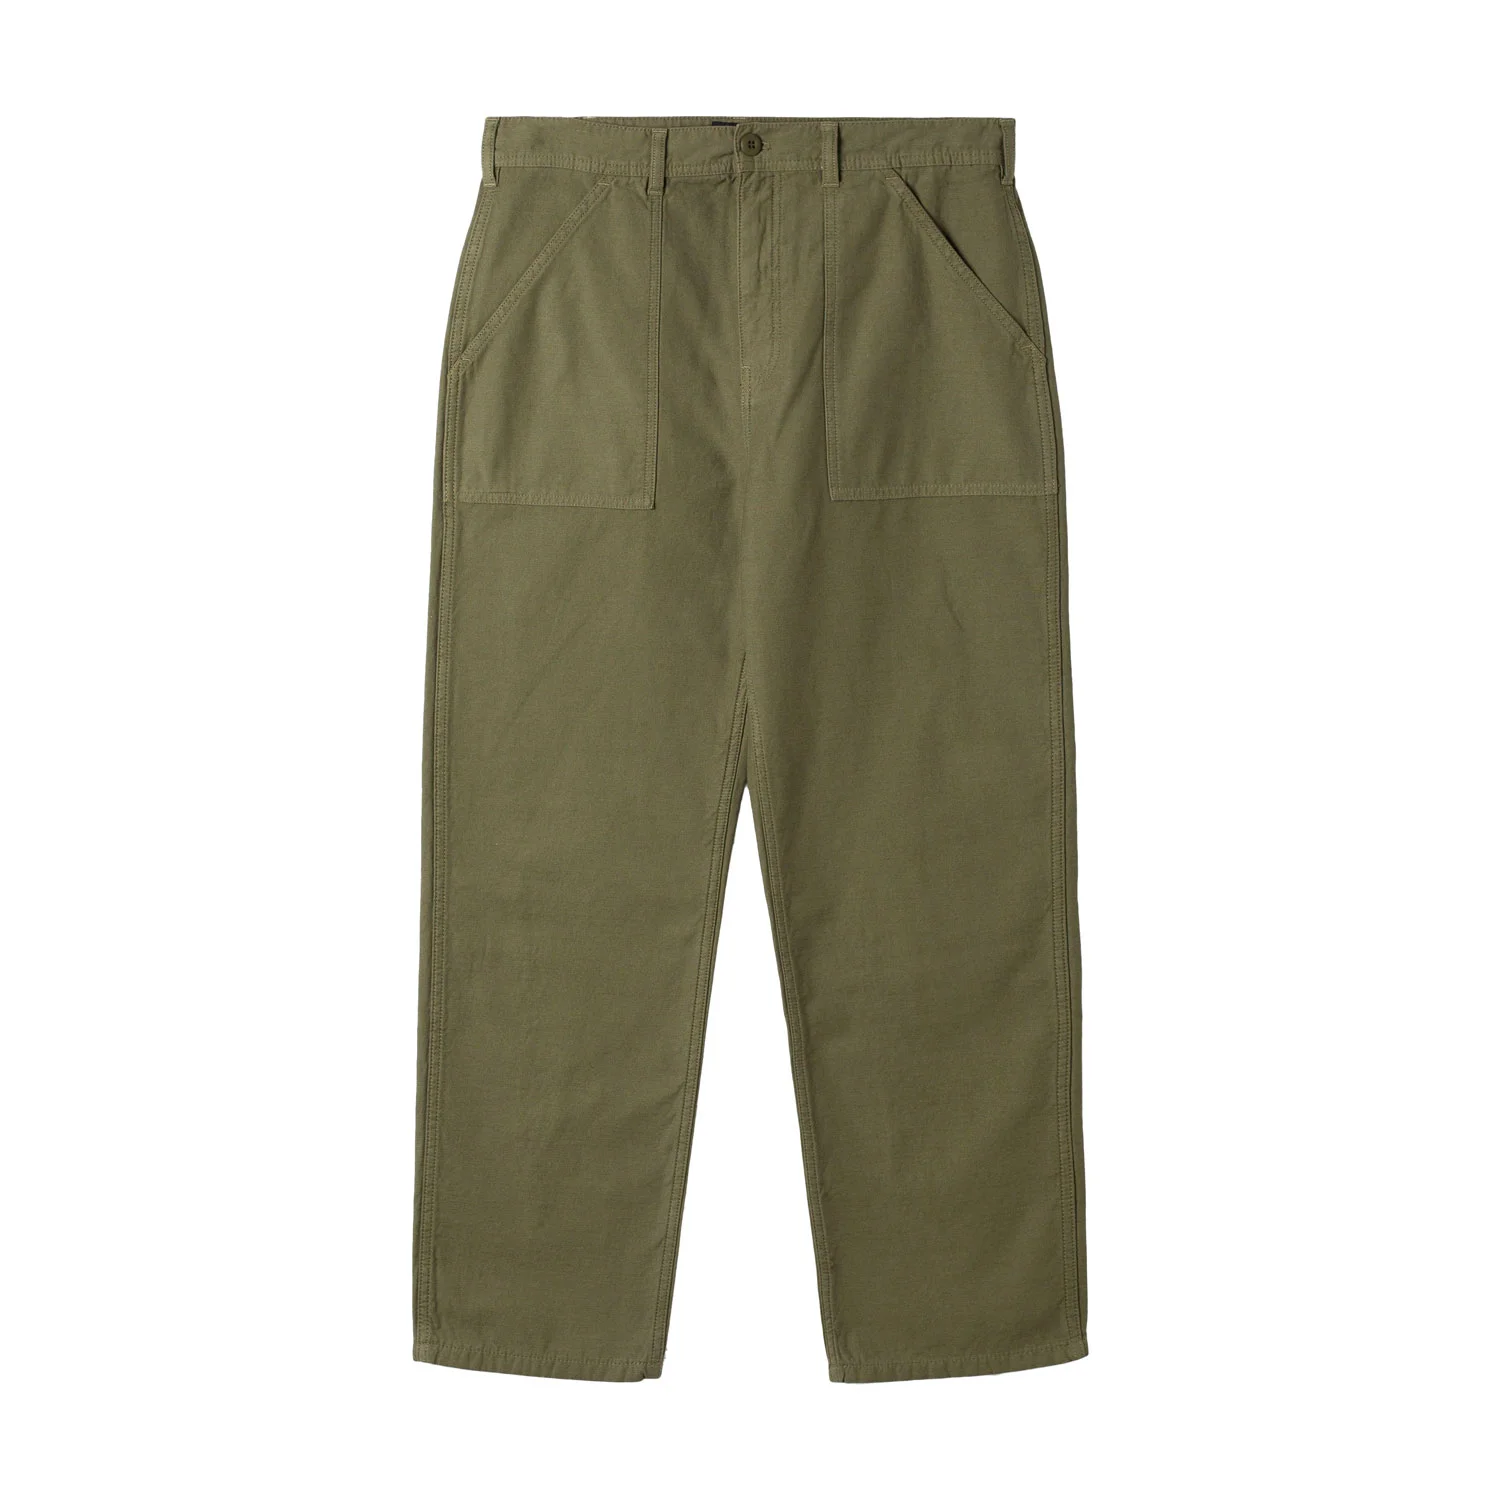 Stanray Fat Pant - Olive